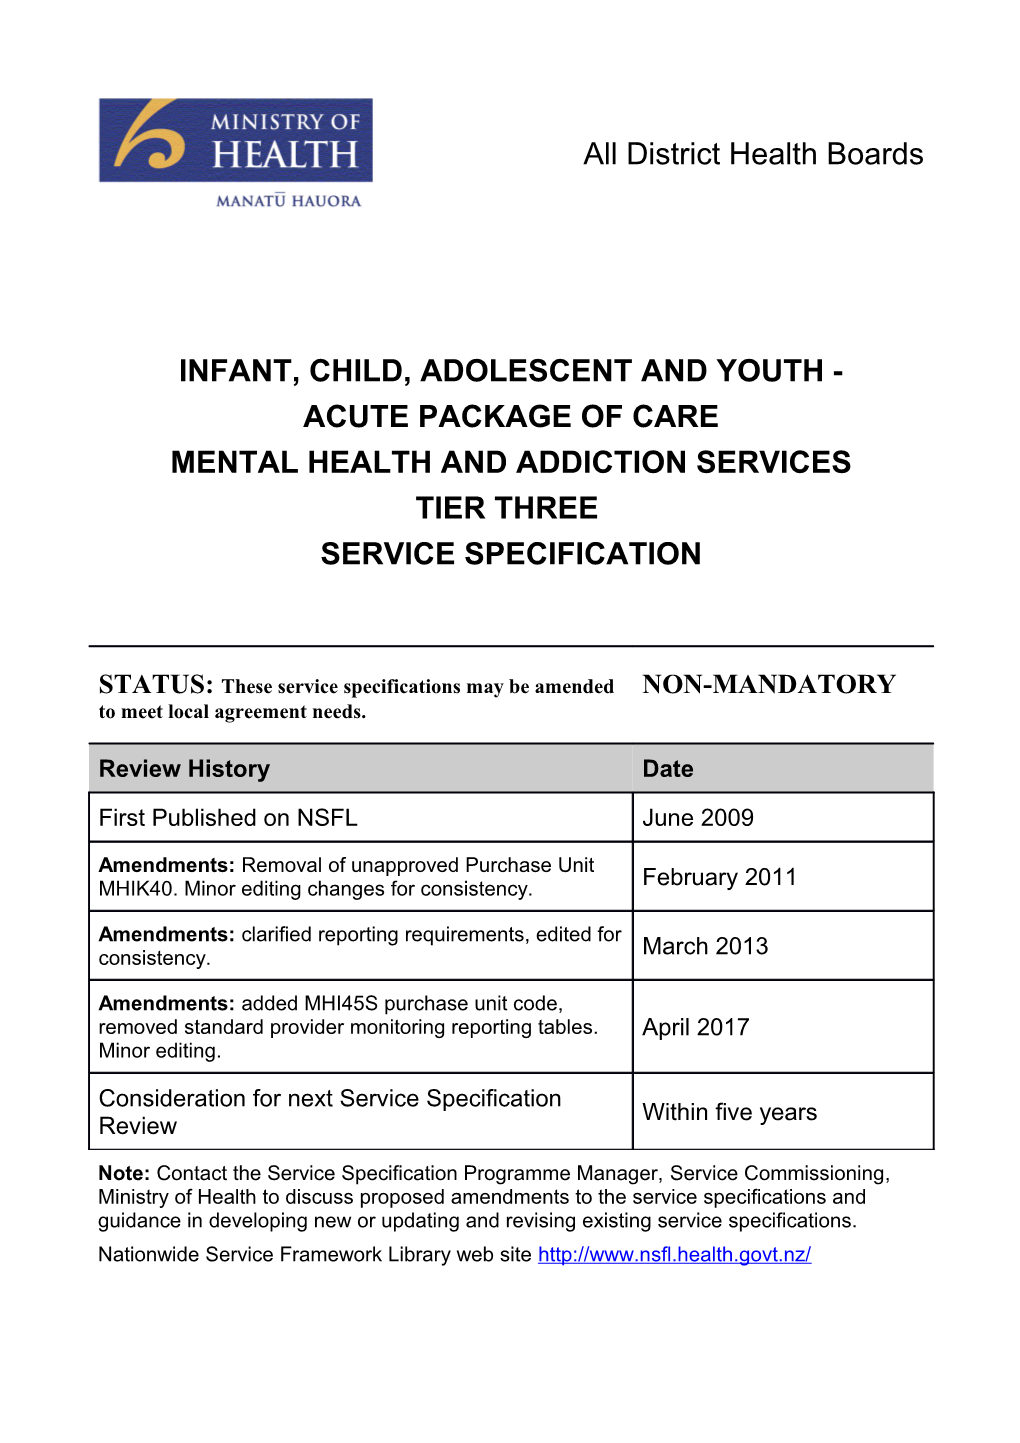 Infant, Child, Adolescent and Youth - Acute Package of Care